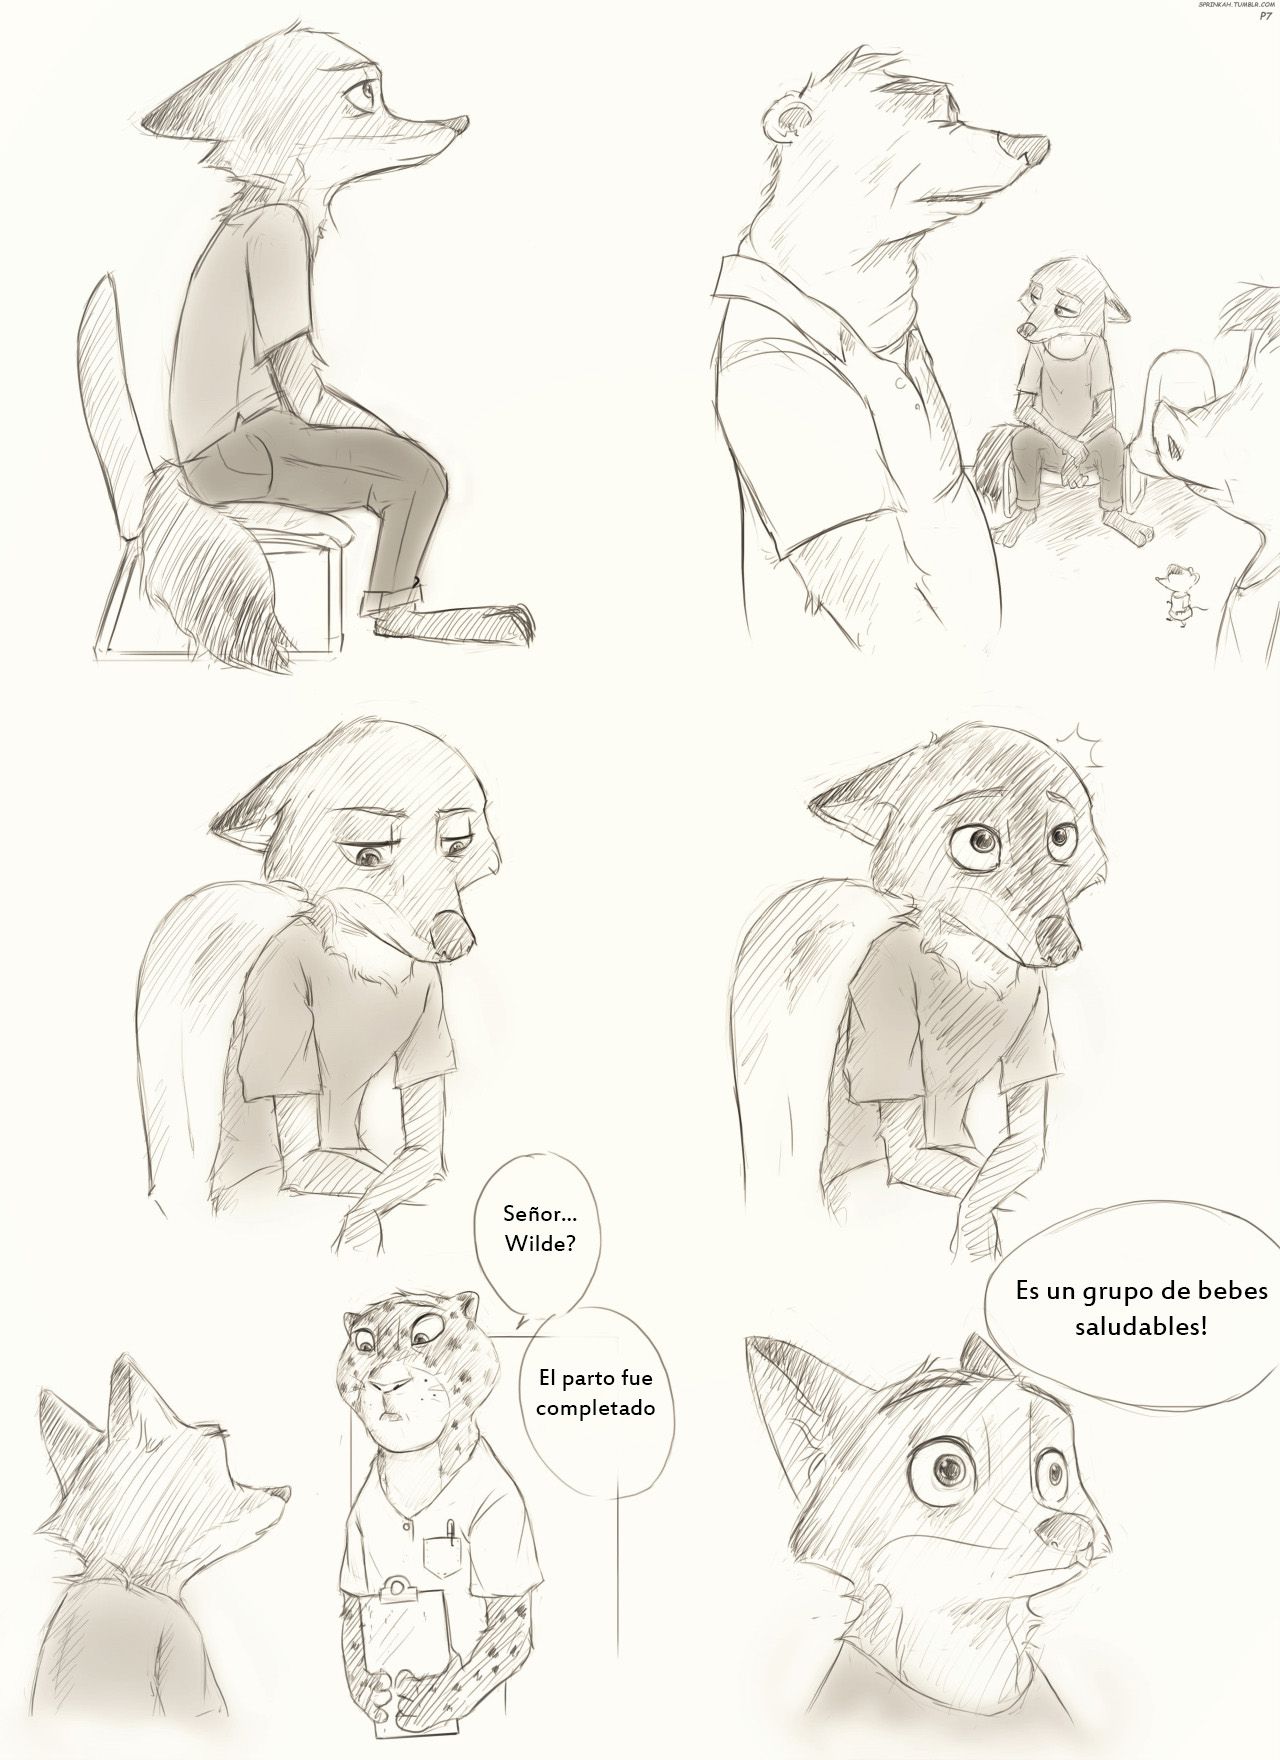 [Sprinkah] This is what true love looks like (Zootopia) (Spanish) (On Going) [Landsec] http://sprinkah.tumblr.com/ 12